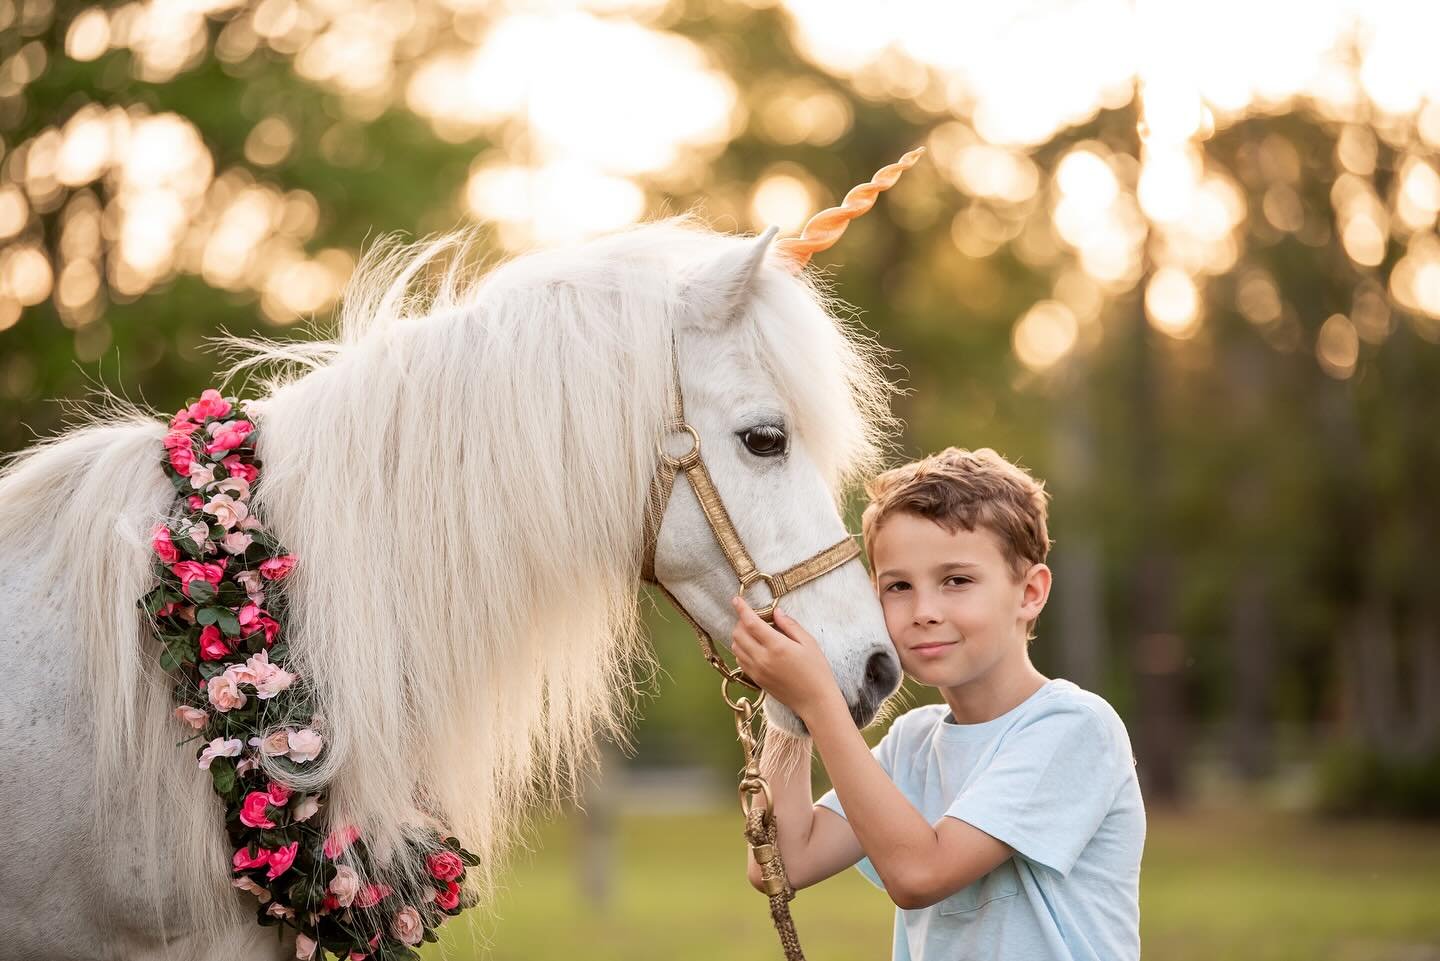 Unicorn Mini-Sessions 5/18 🦄🩷 Join us for a magical photo experience with @squinlanequine book yours today!

https://book.usesession.com/s/DbJuz5hzE 

#wilmingtonnc #unicorn #wilmingtonminisession #horse #unicornsession #wilmingtonncphotographer #h